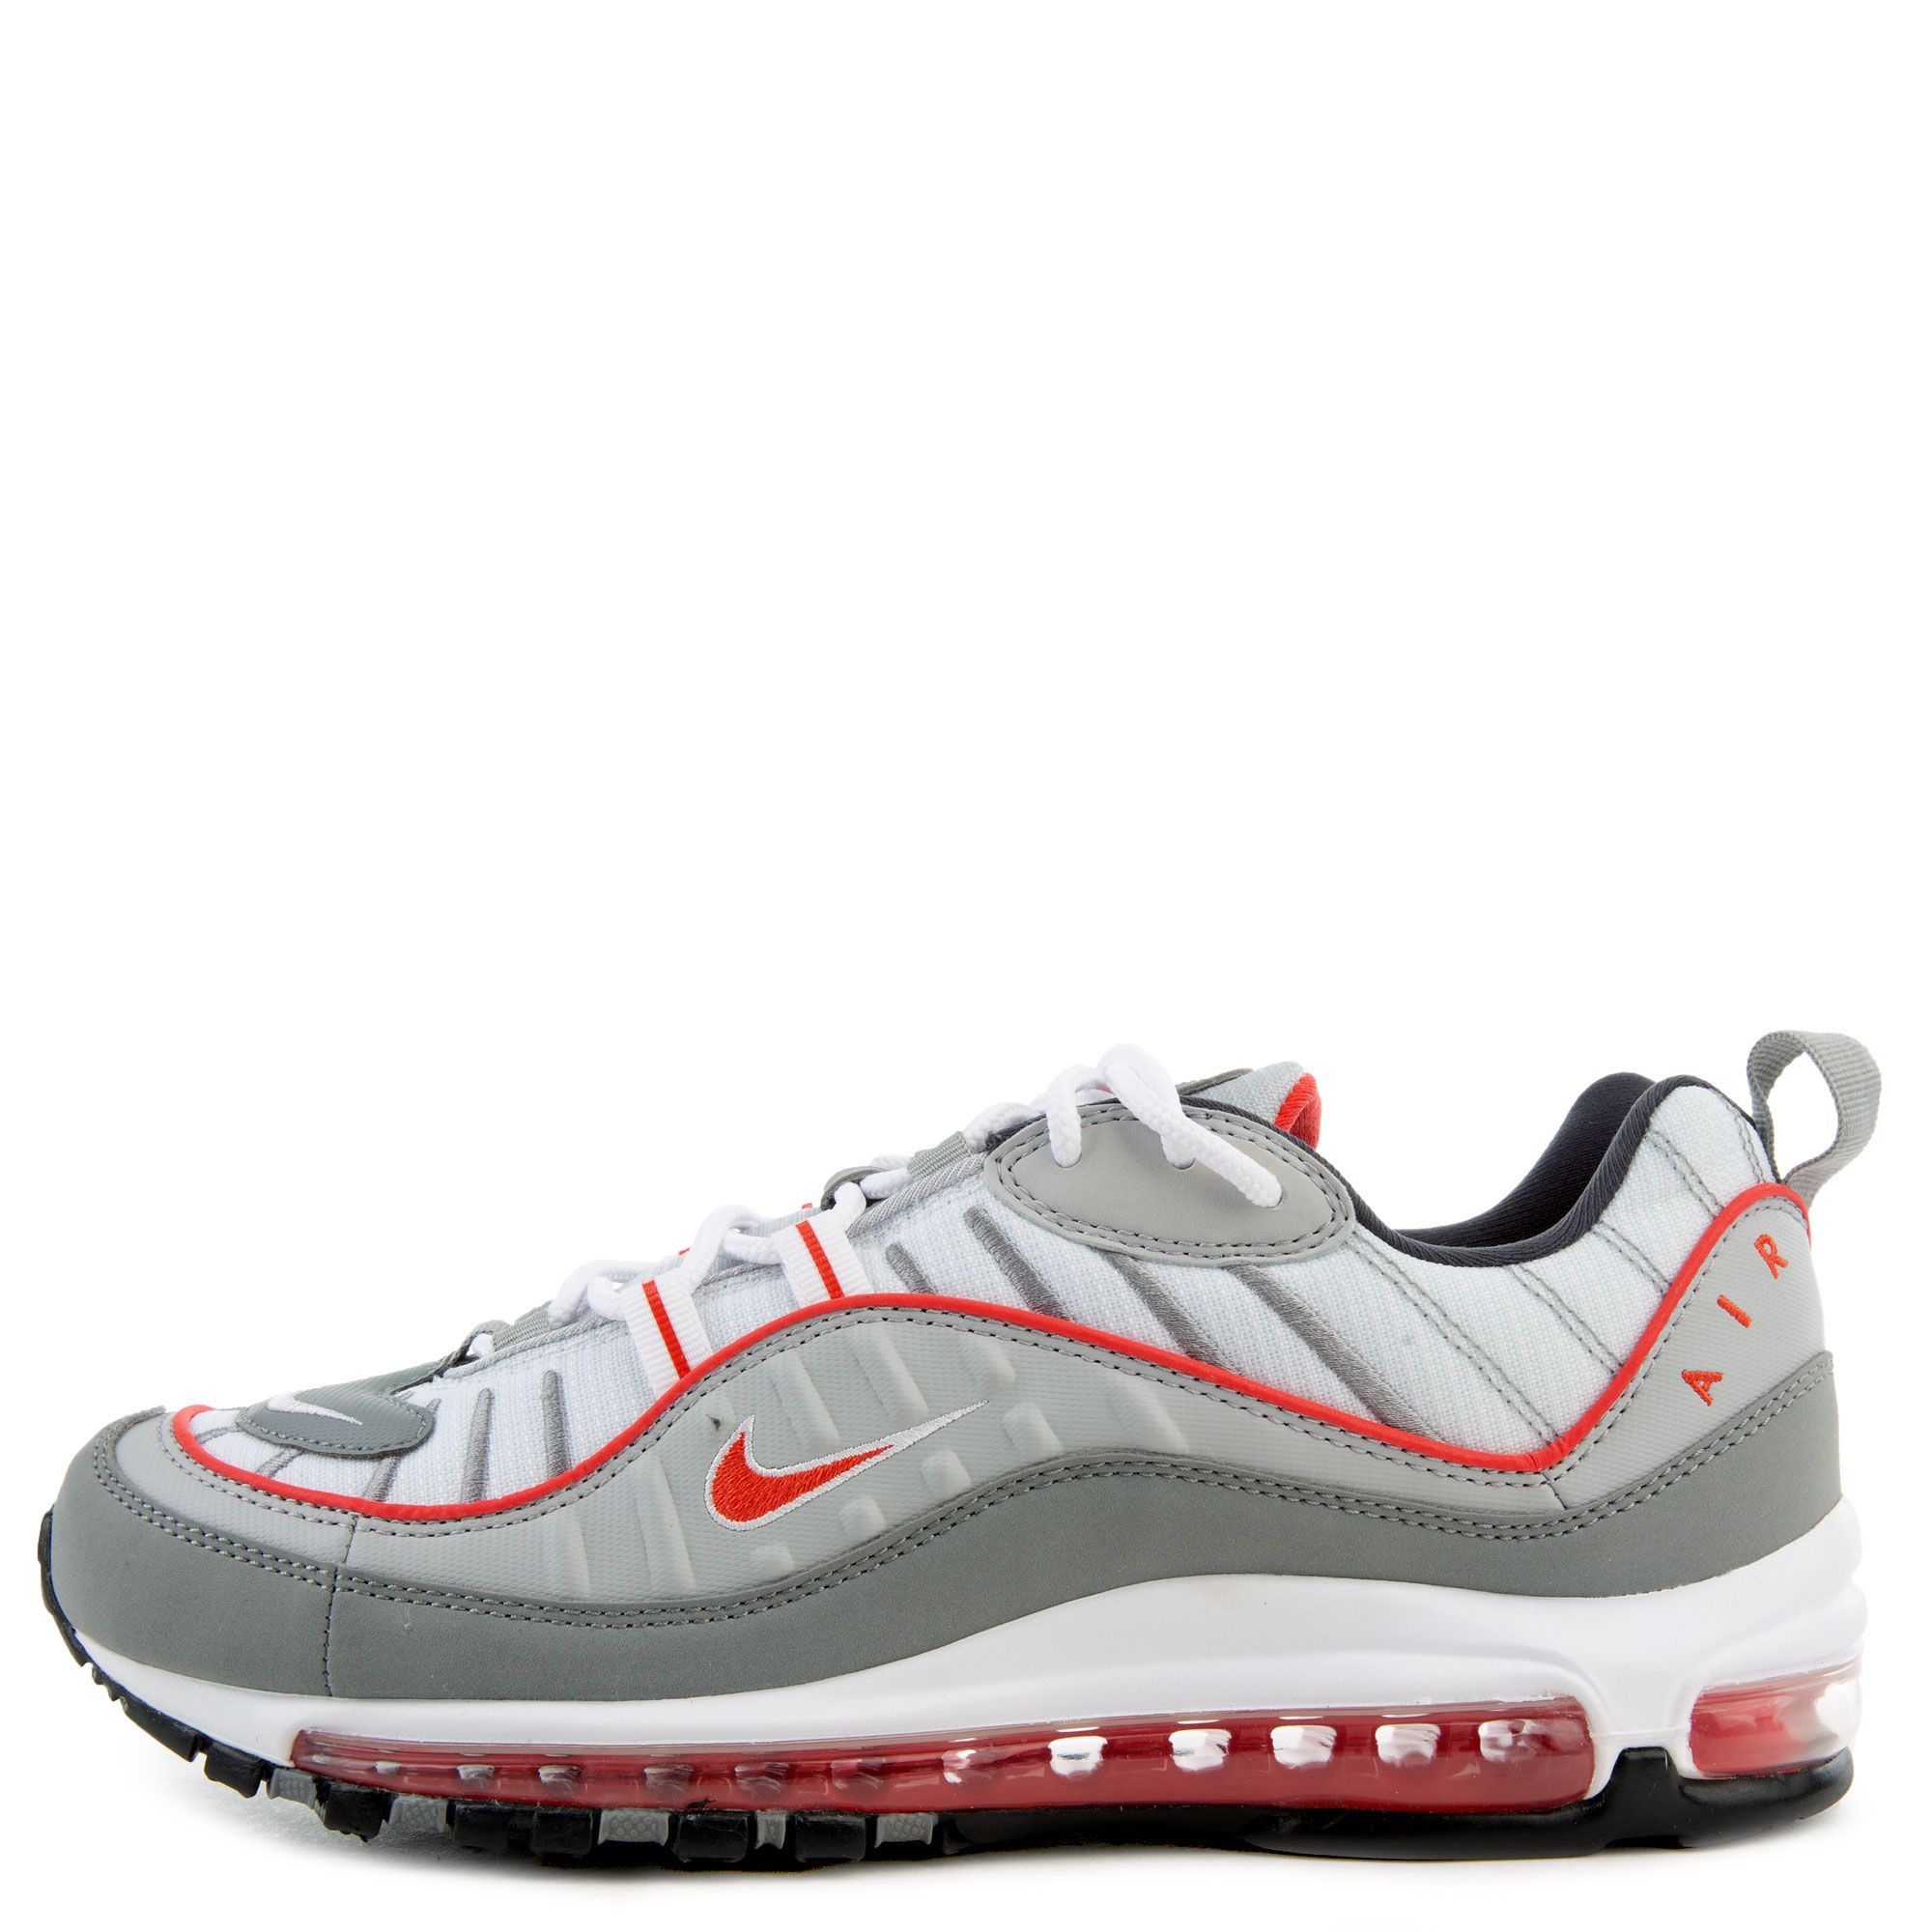 Air Max 98 Particle Grey/Track Red-Iron 